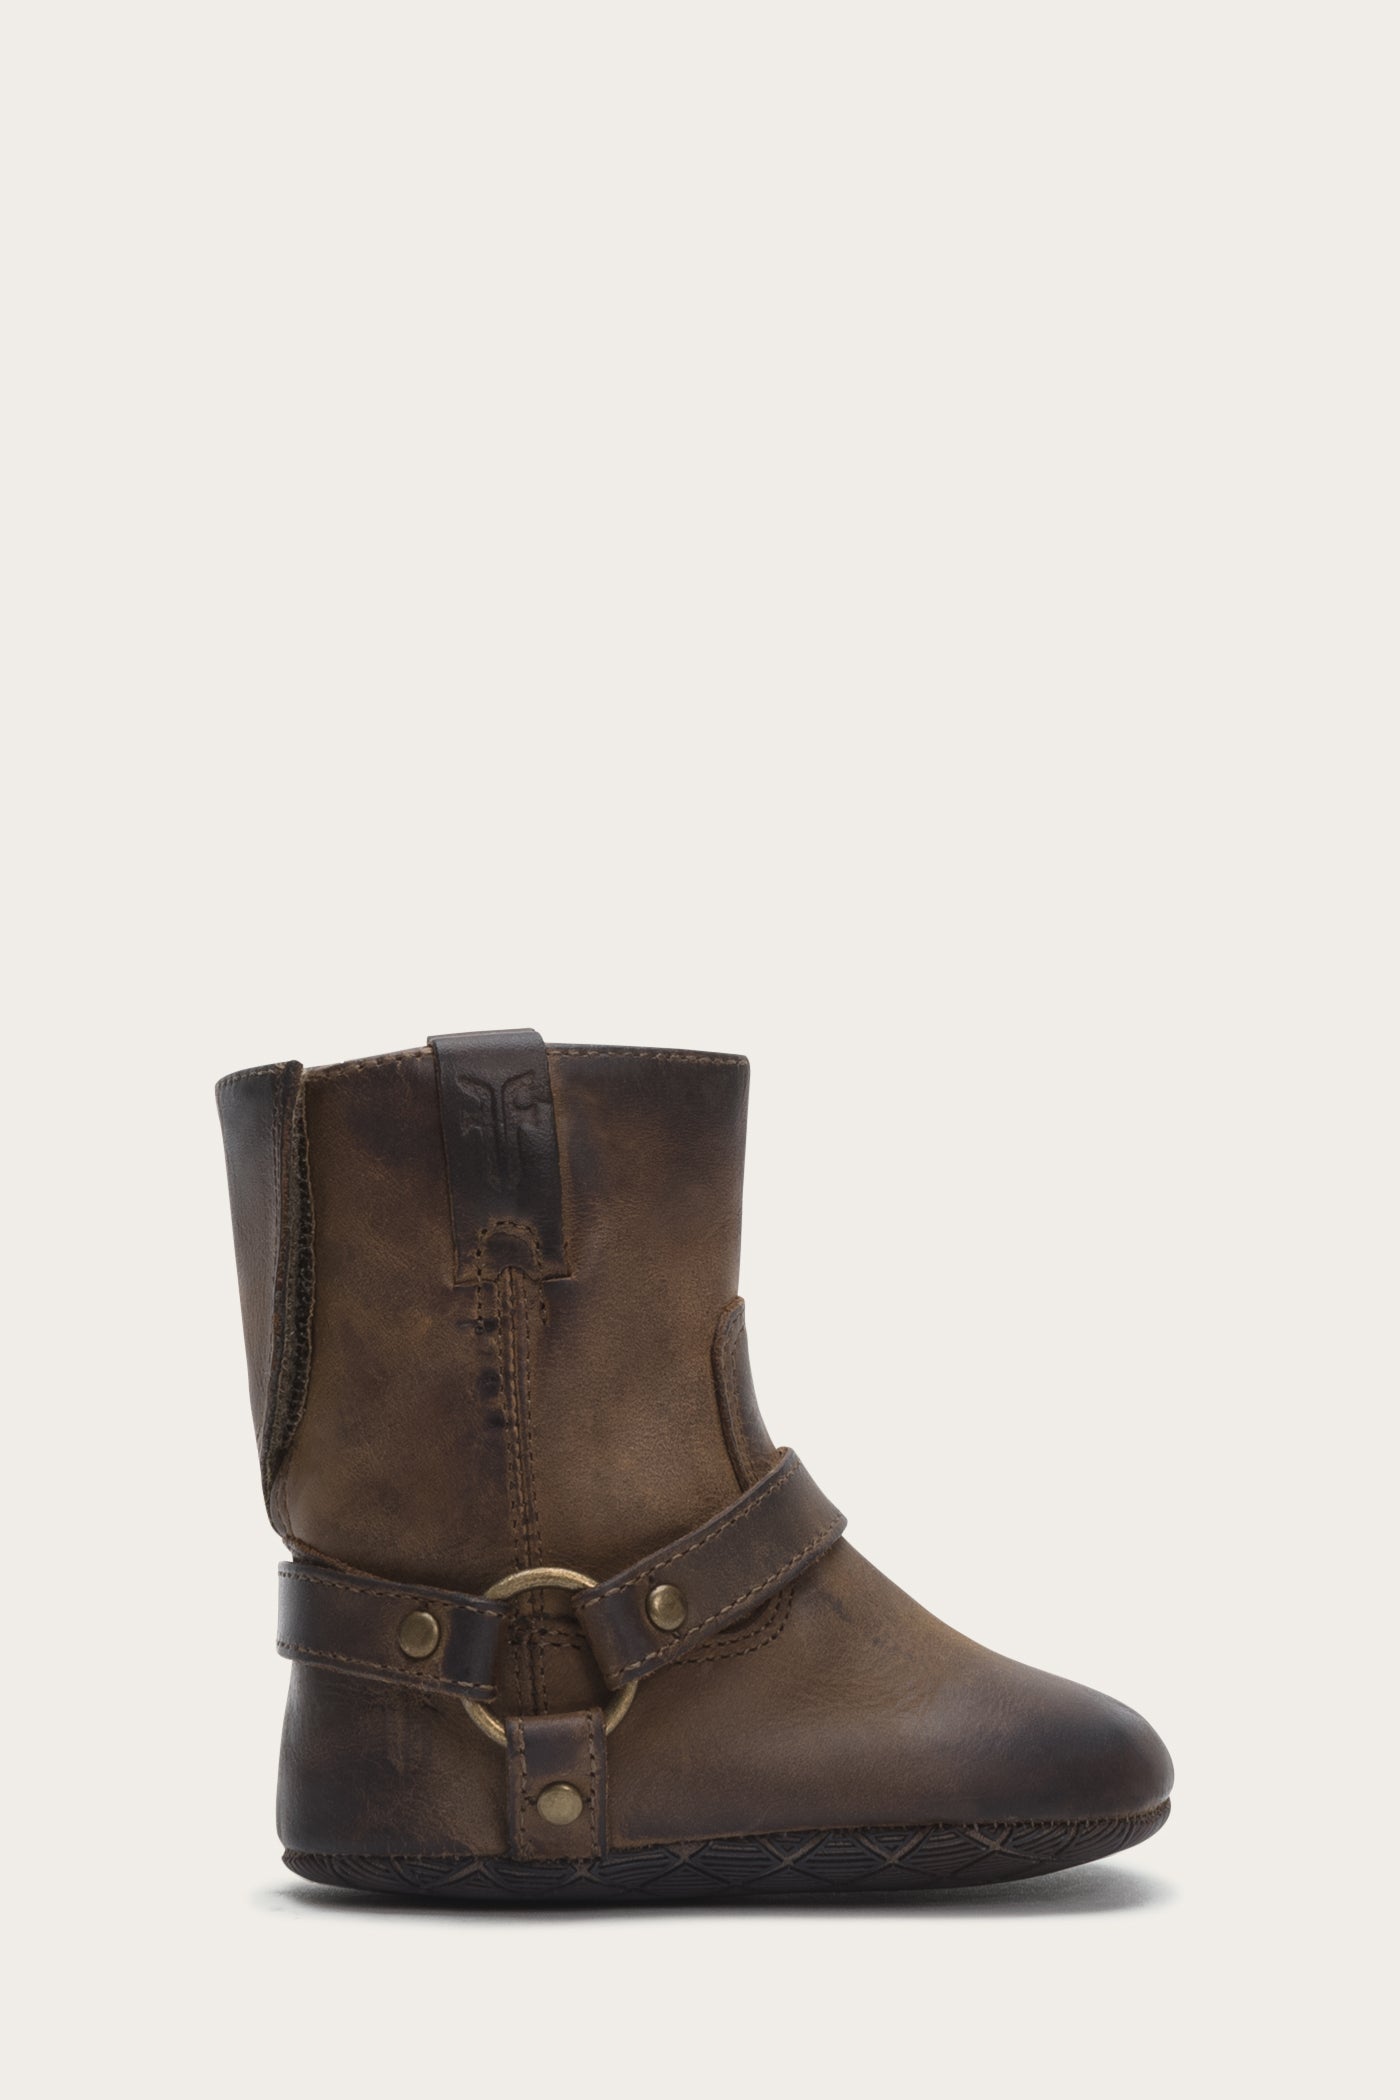 baby frye boots